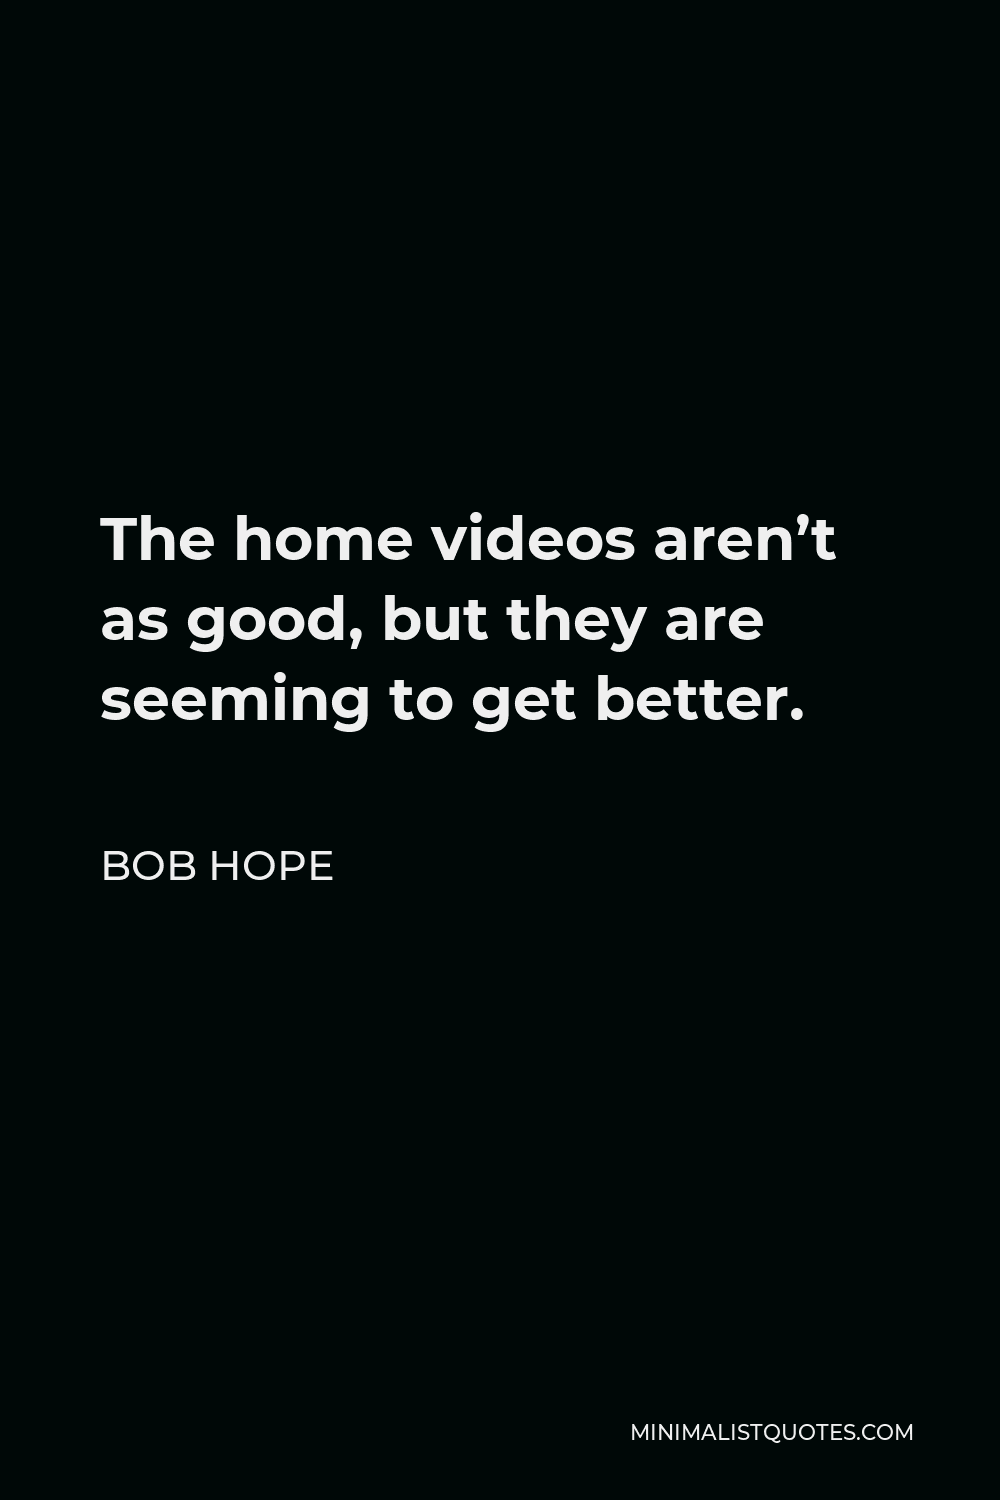 Bob Hope Quote - The home videos aren’t as good, but they are seeming to get better.